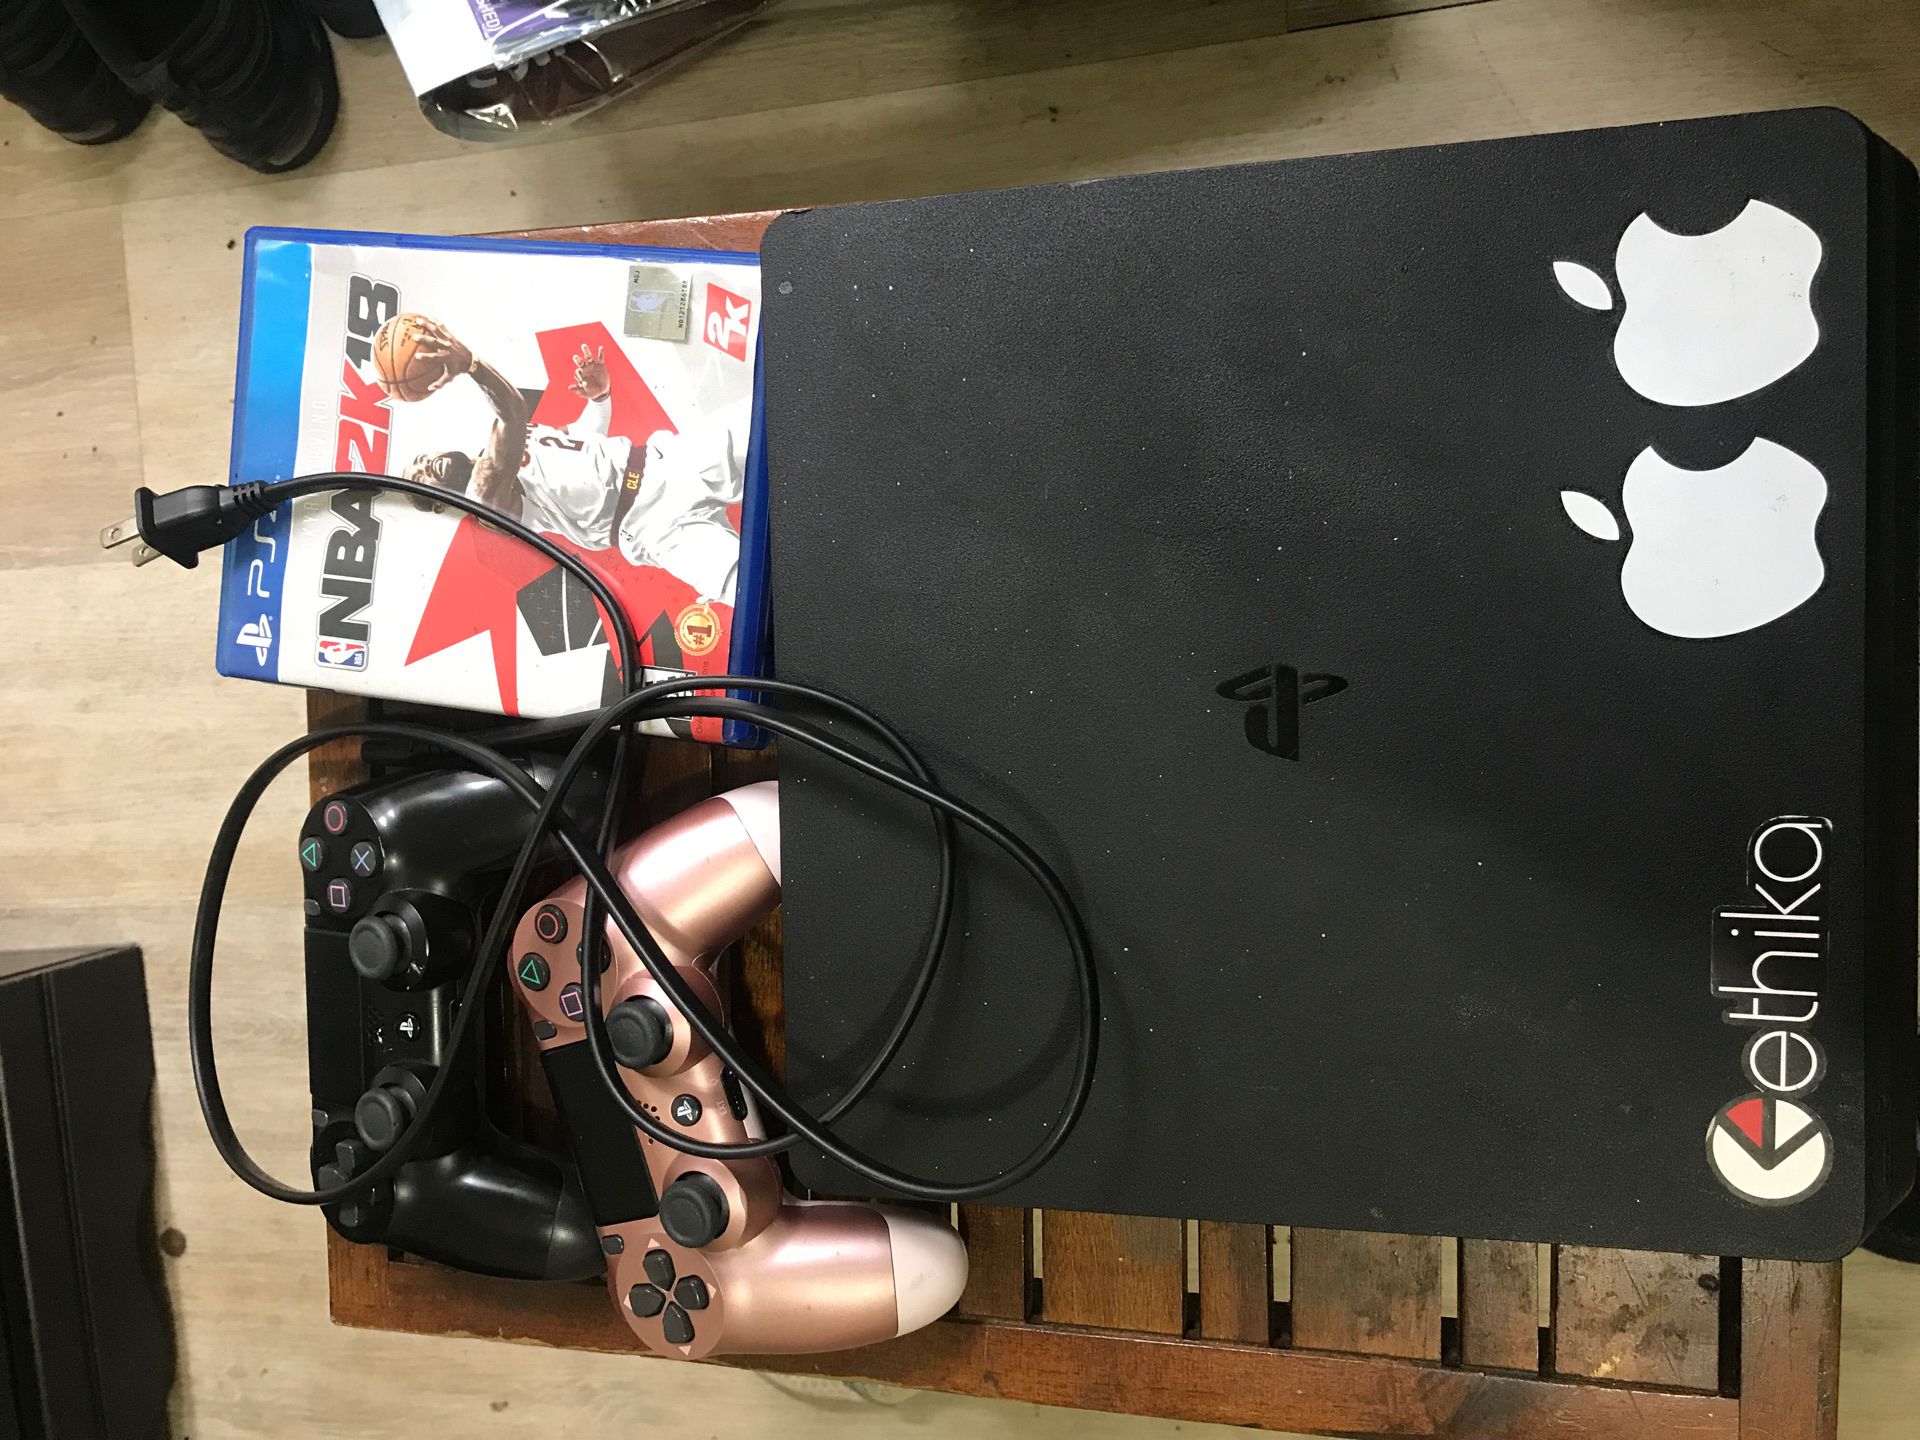 PS4 2 controllers & a Couple games